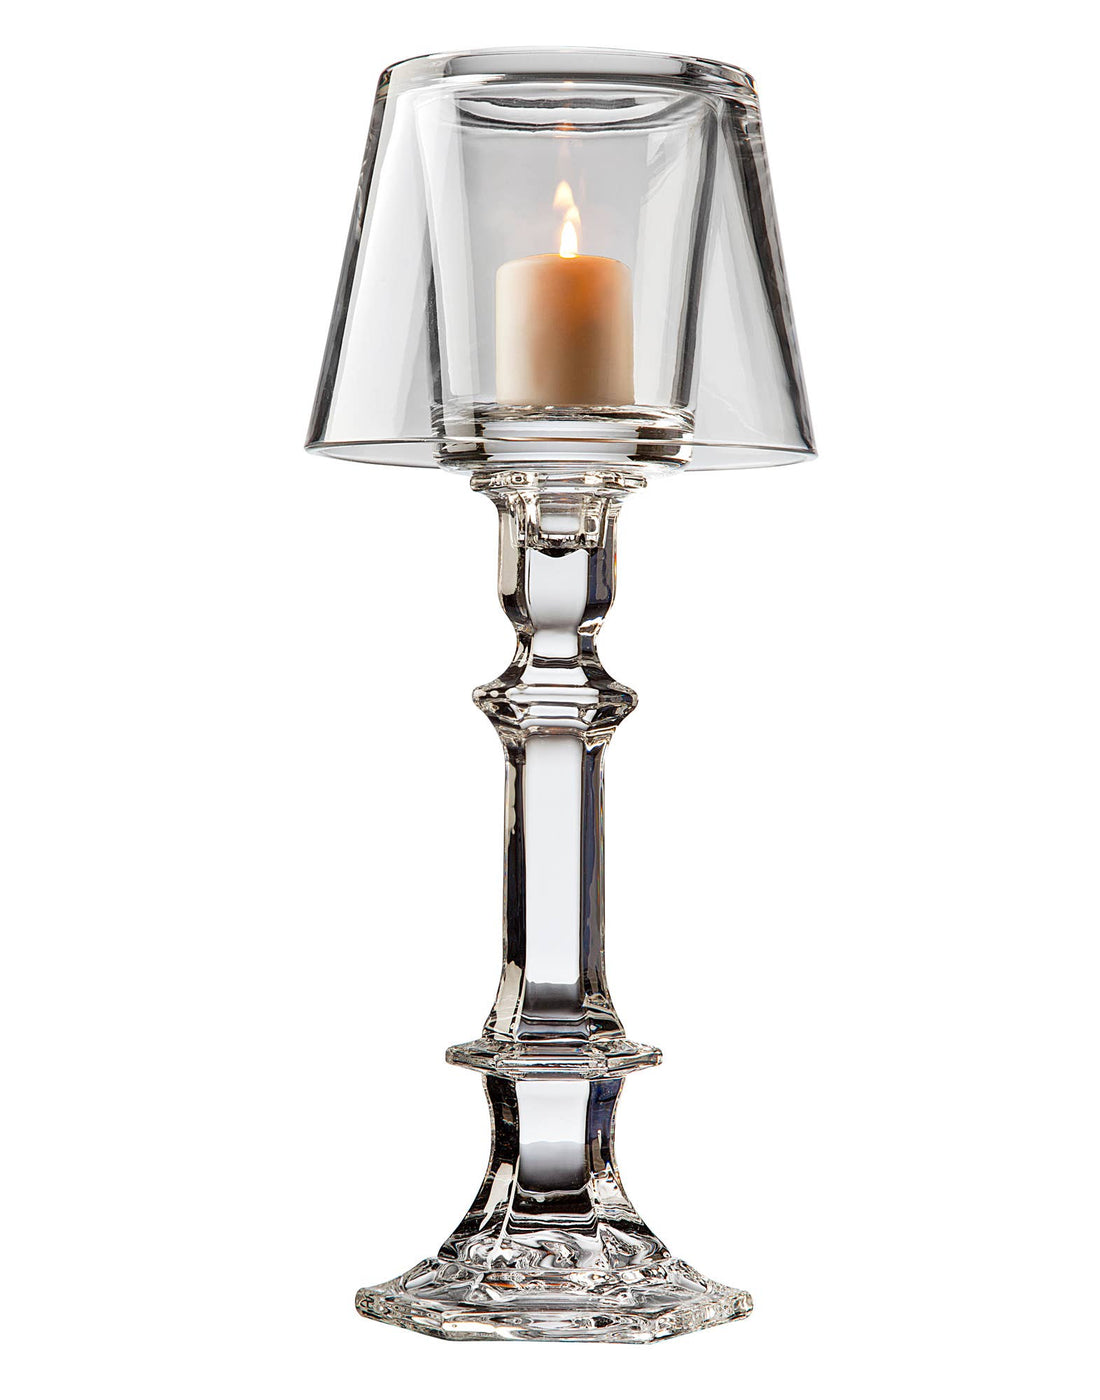 A lit candle inside a non-leaded crystal Godinger hurricane lamp placed on top of a silver candlestick holder.